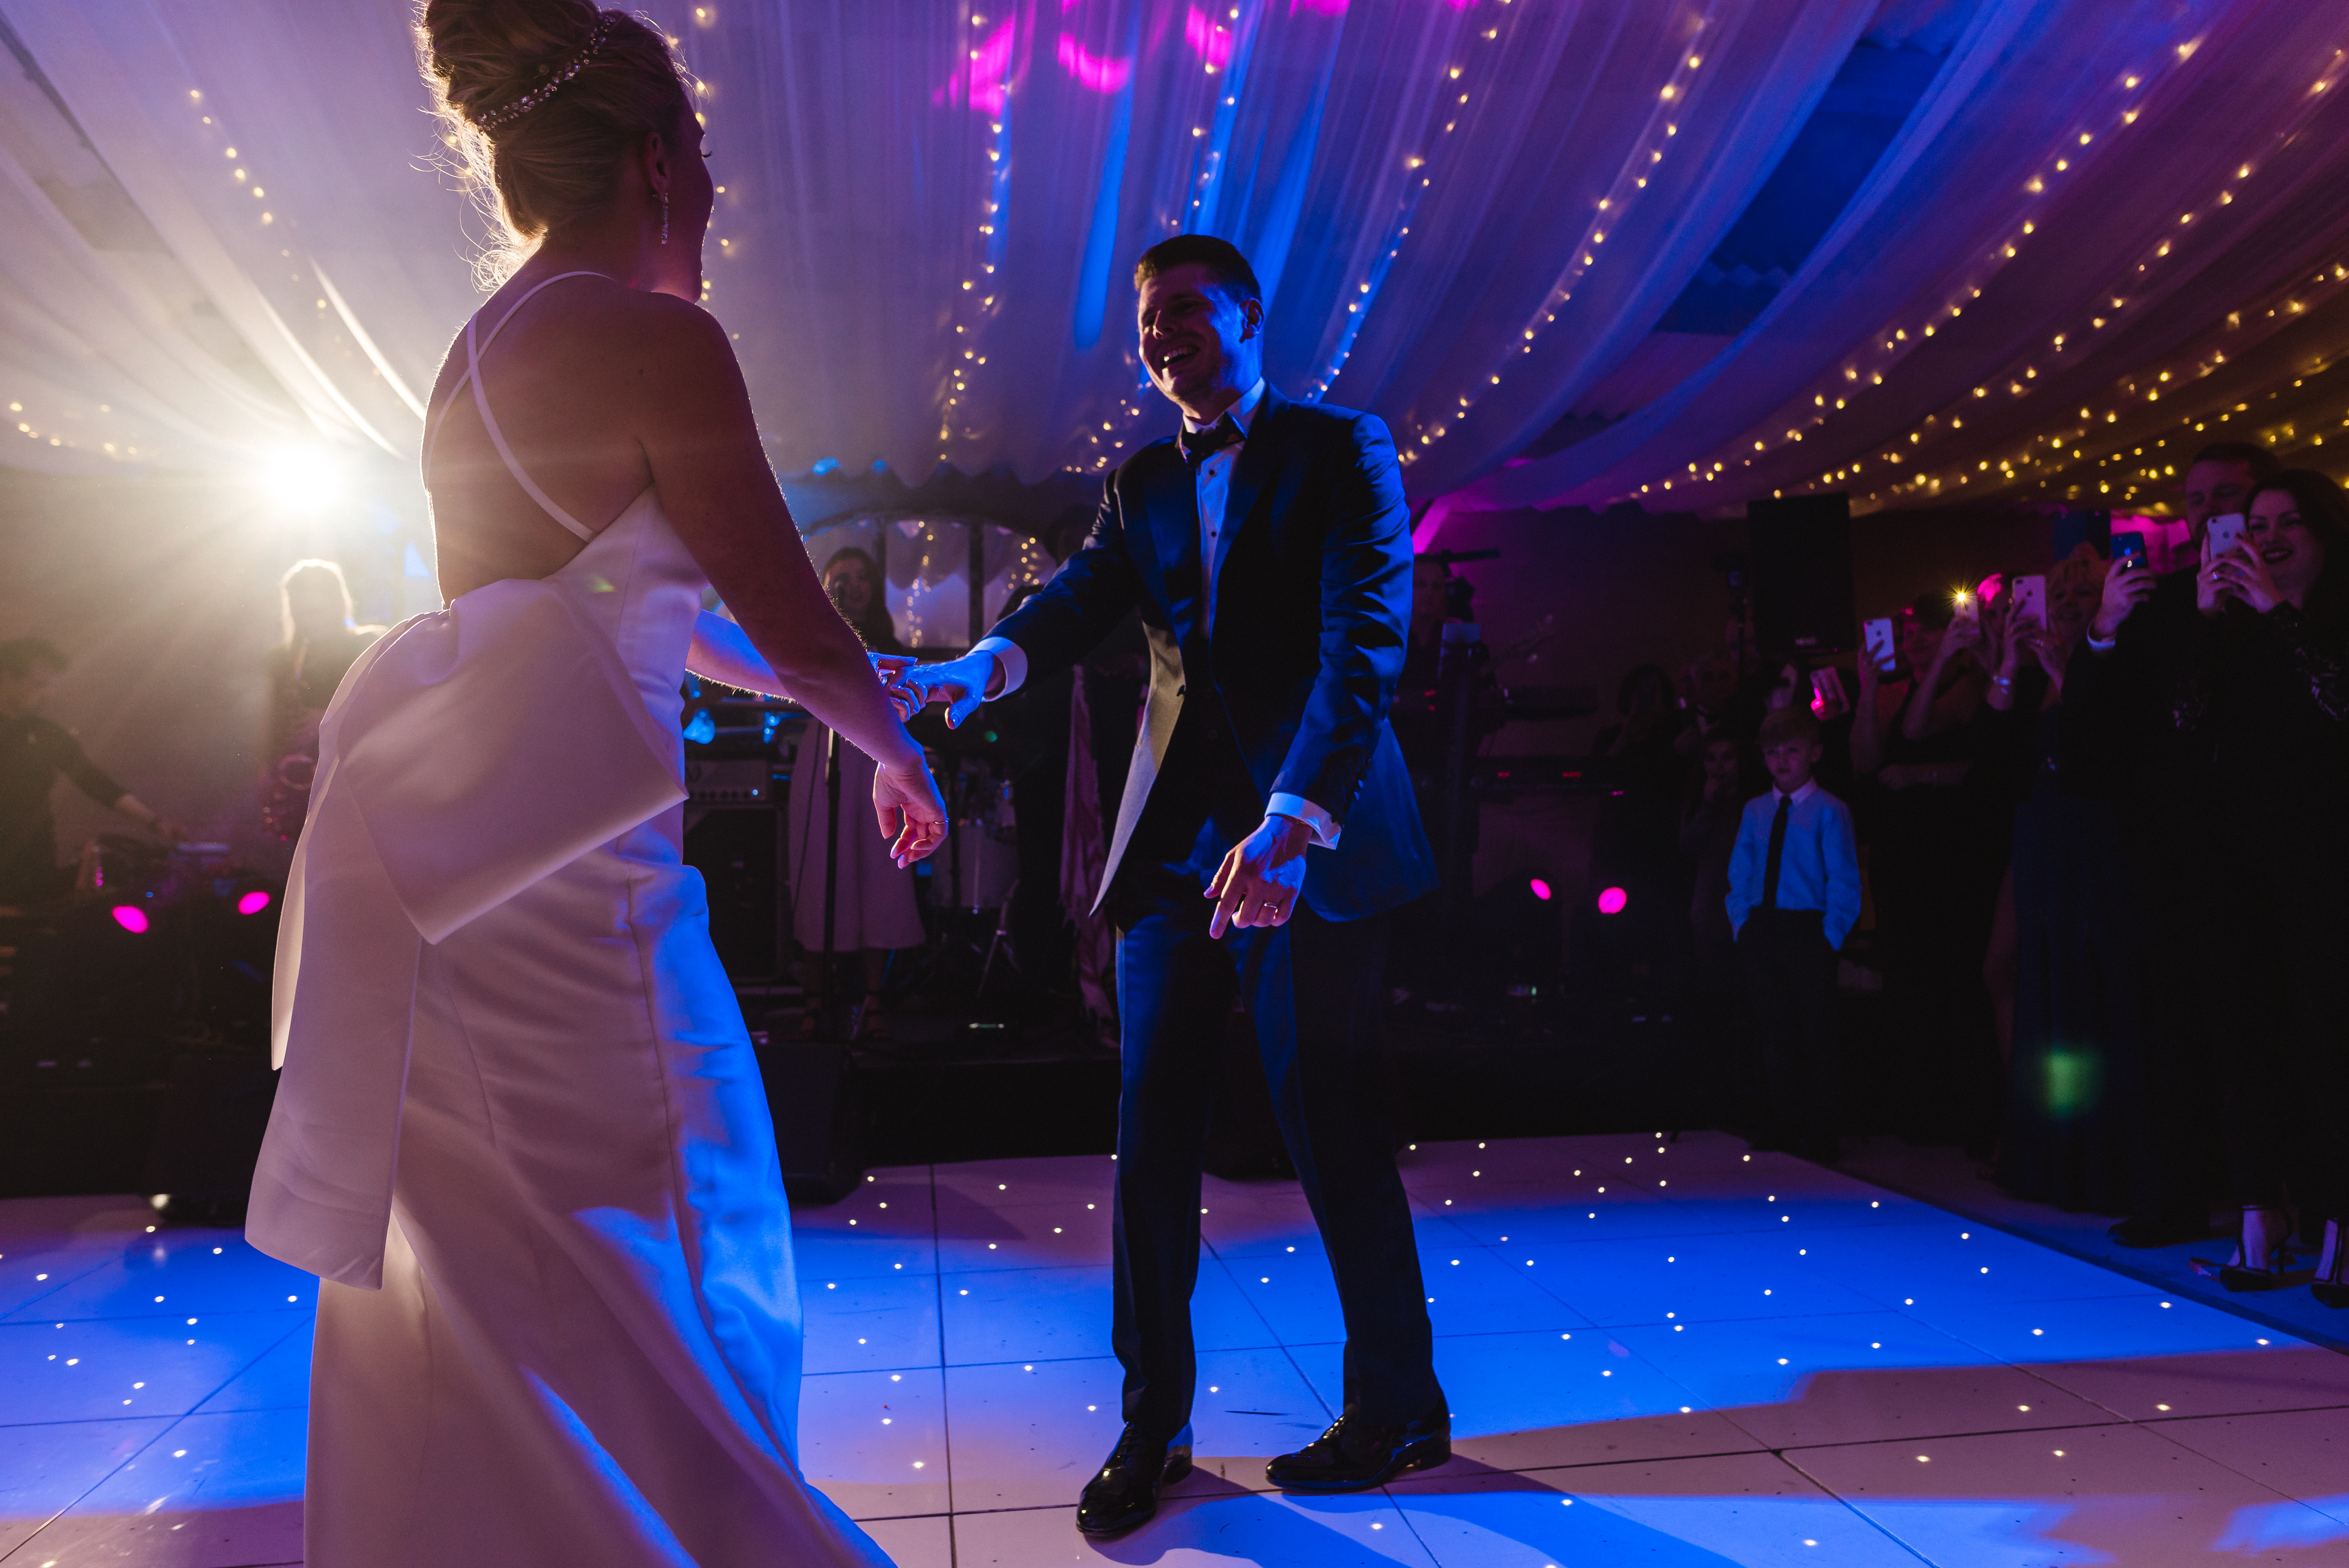 30 Best First Dance Songs to Choose From for Your Wedding